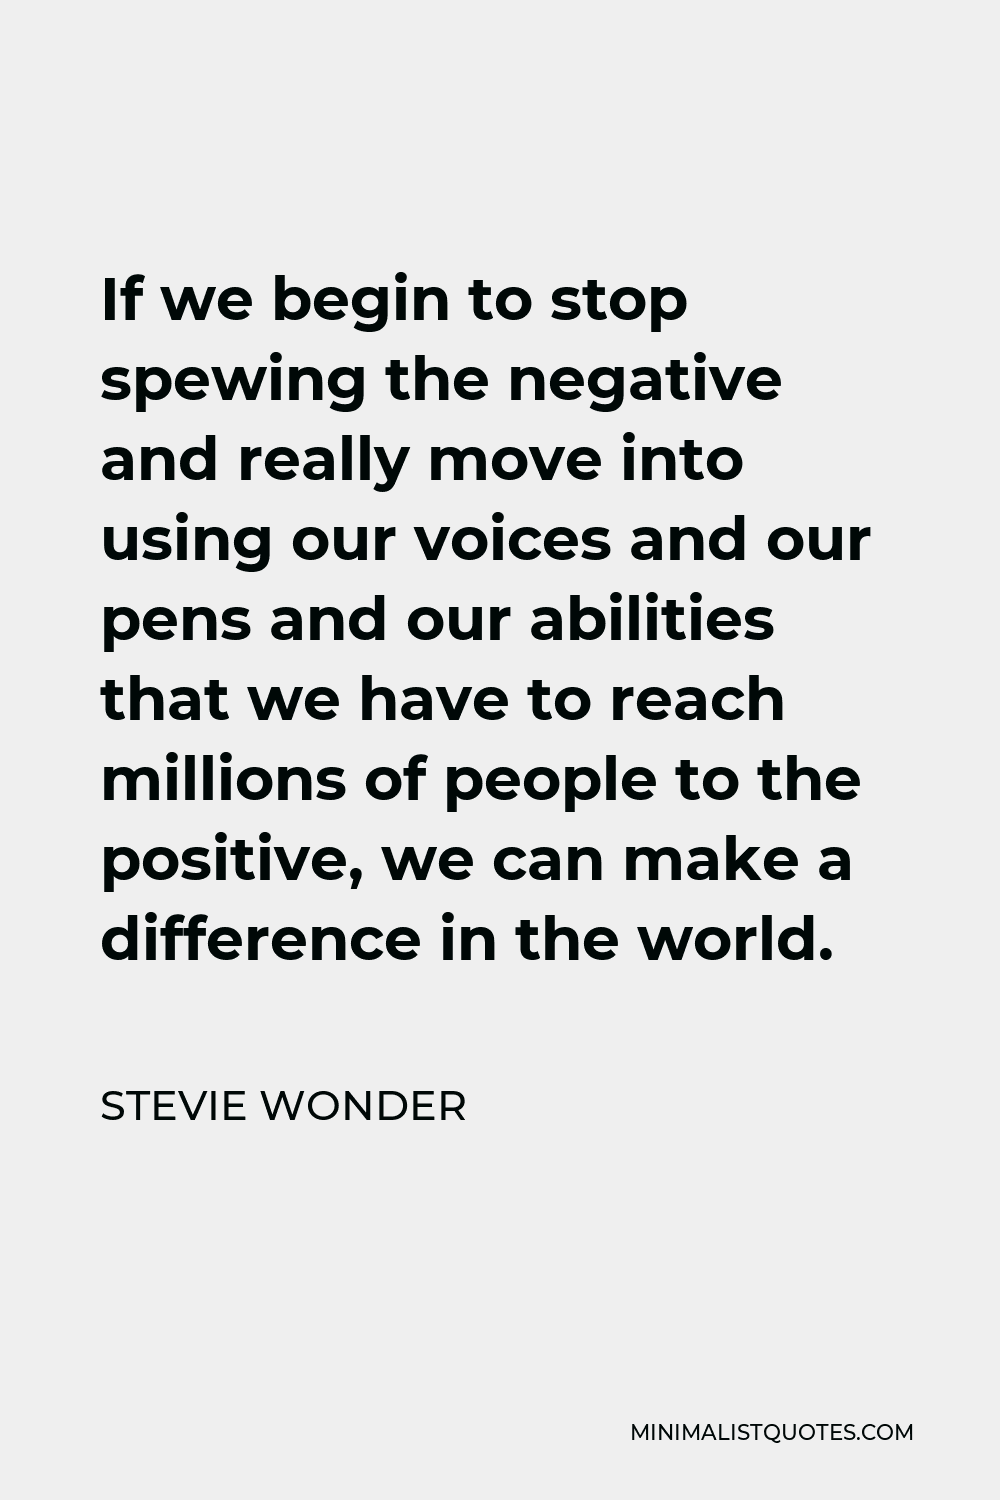 Stevie Wonder Quote - If we begin to stop spewing the negative and really move into using our voices and our pens and our abilities that we have to reach millions of people to the positive, we can make a difference in the world.